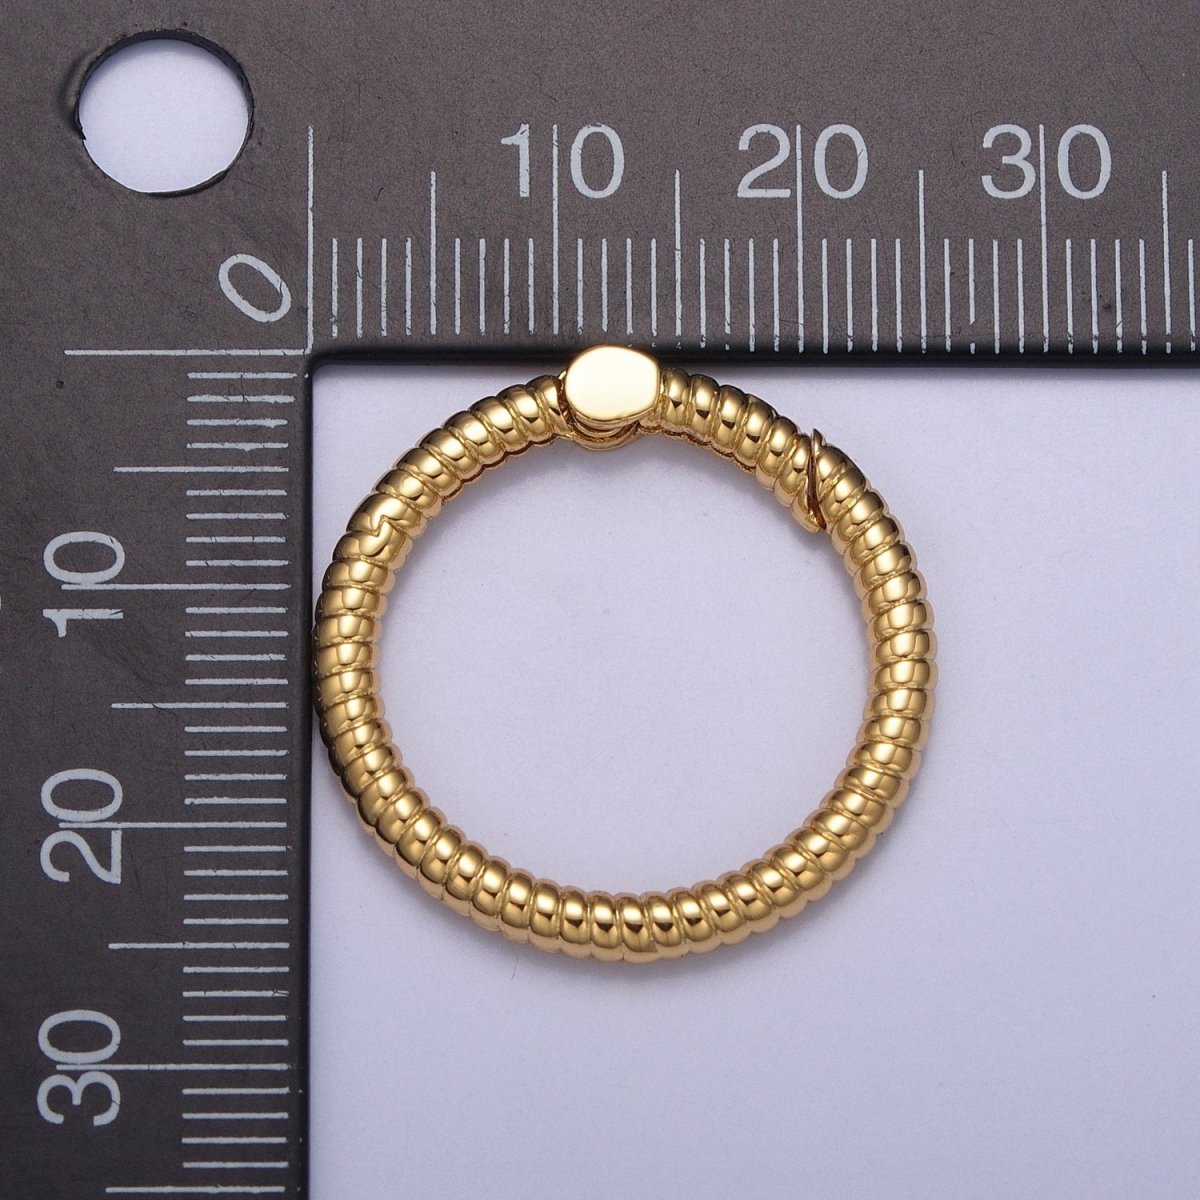 Dainty Gold Round Spring Gate Ring, Push Gate Clasp Charm Holder 14K Gold Filled Clasp for Charm Holder Connector L-729 L-730 - DLUXCA